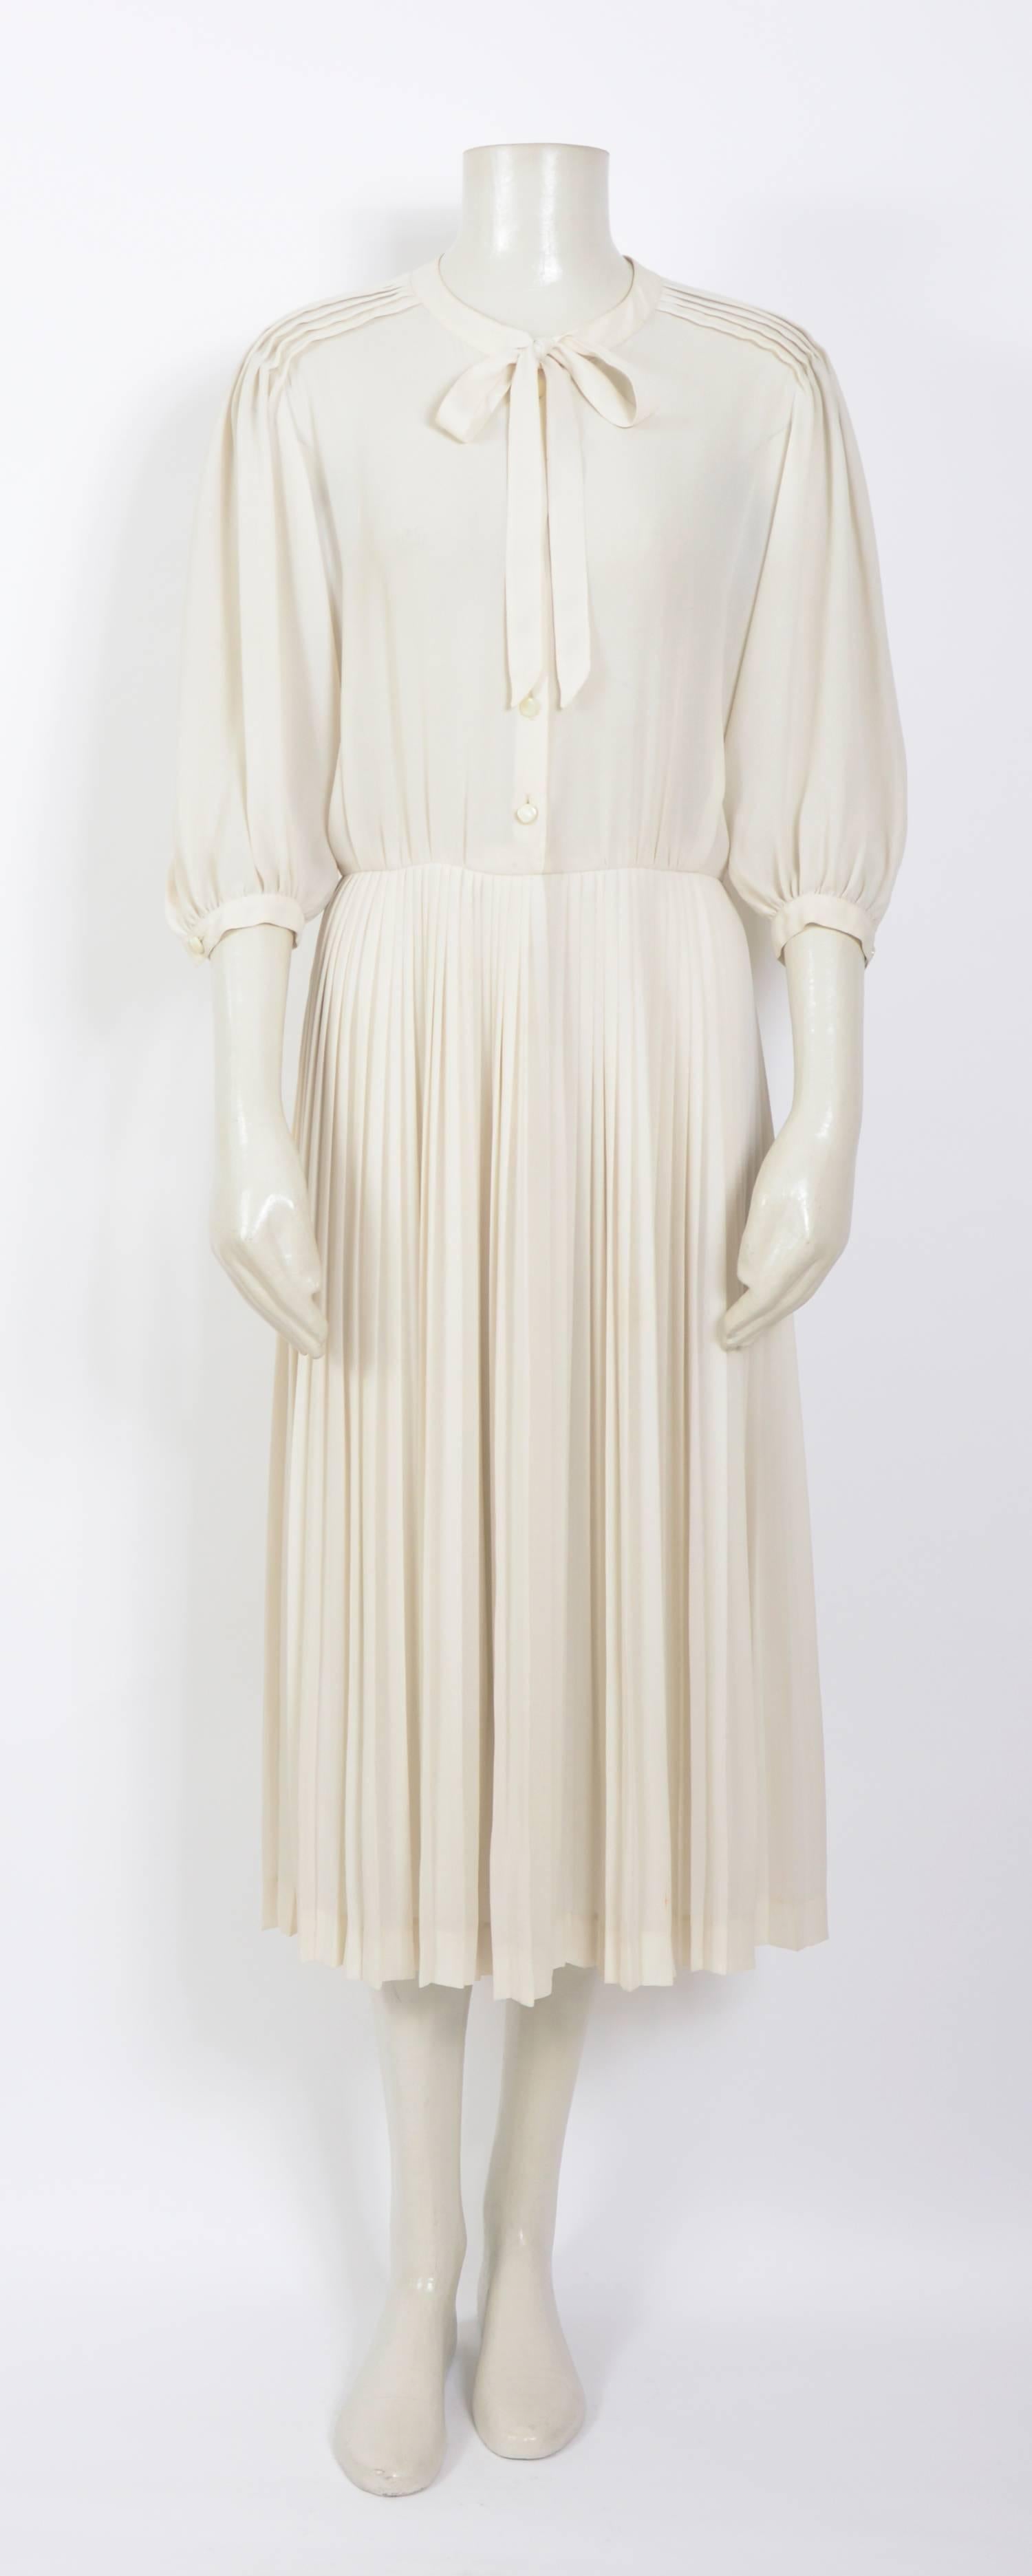 Beautifully made dress by Nina Ricci.
Unlined, pleated skirt, button front closure.
Measurements are taken flat: Ua to Ua 19inch/48cm(x2) - Waist 14inch/36cm(x2) - Total Length 46inch/117cm